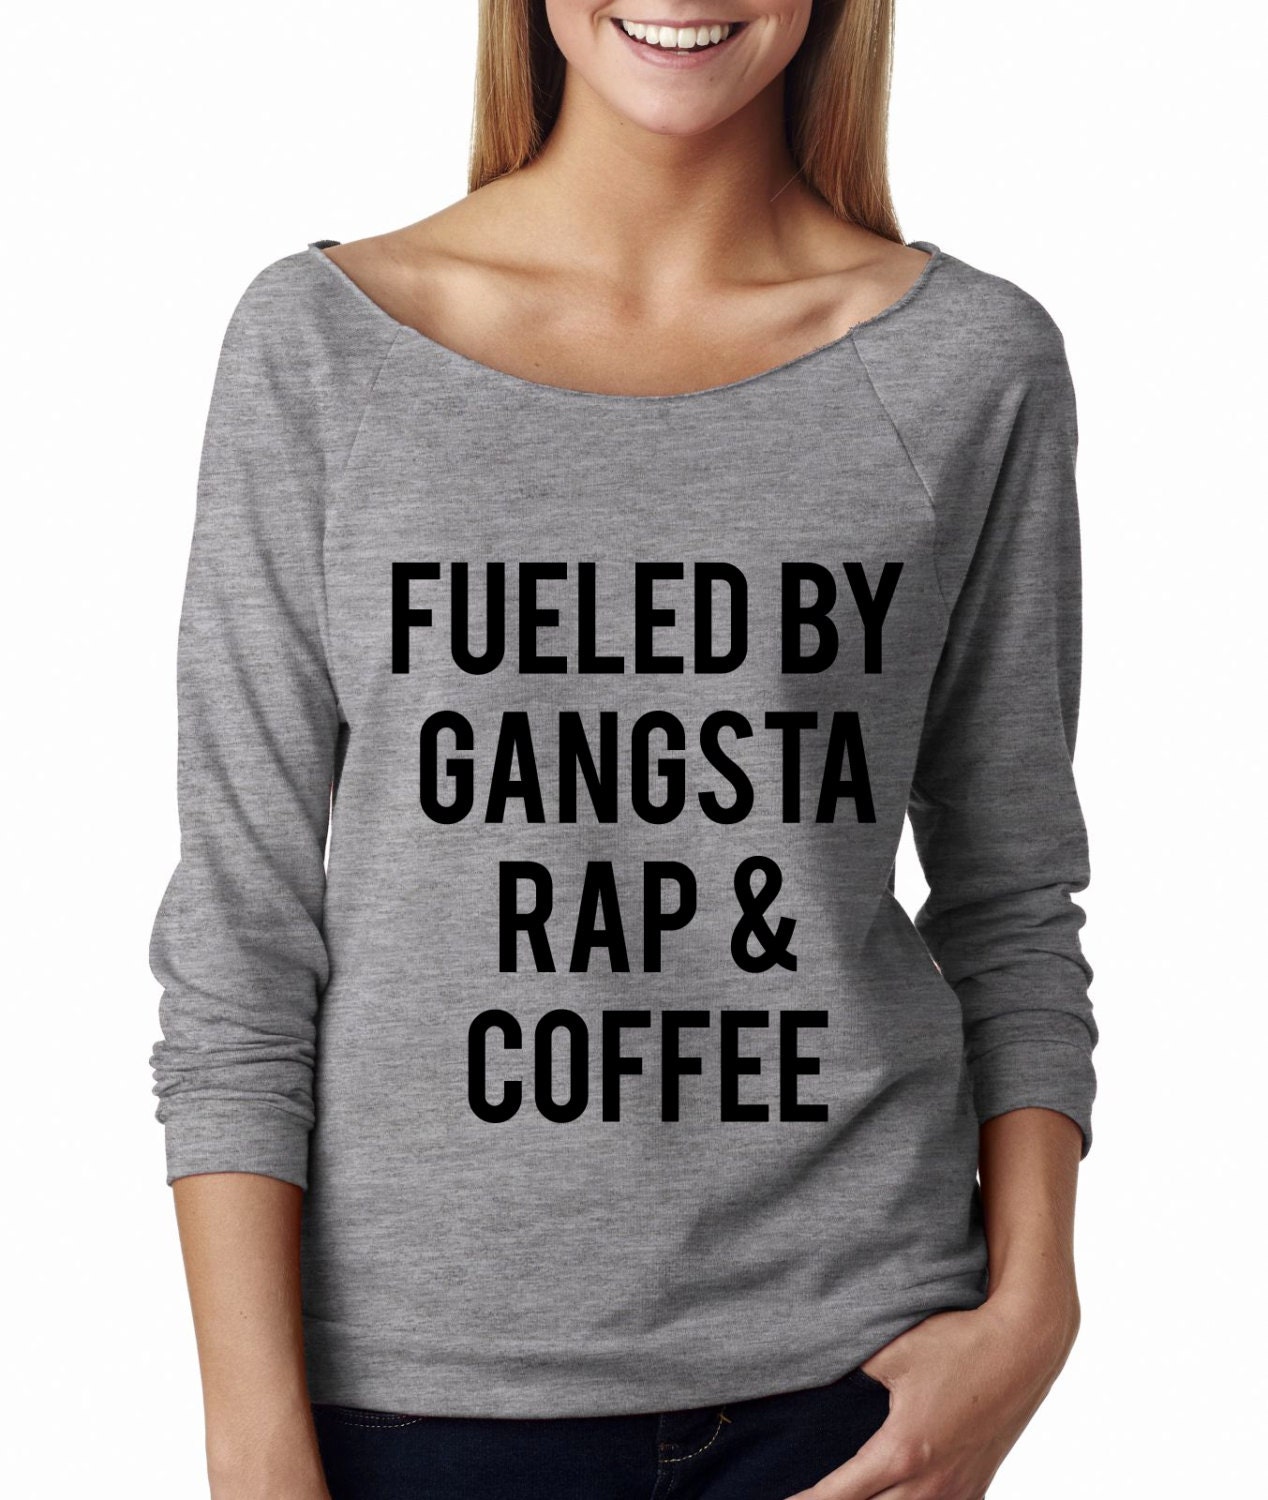 Download Fueled By Gangsta Rap & Coffee Wide Neck Shirt Graphic Shirt